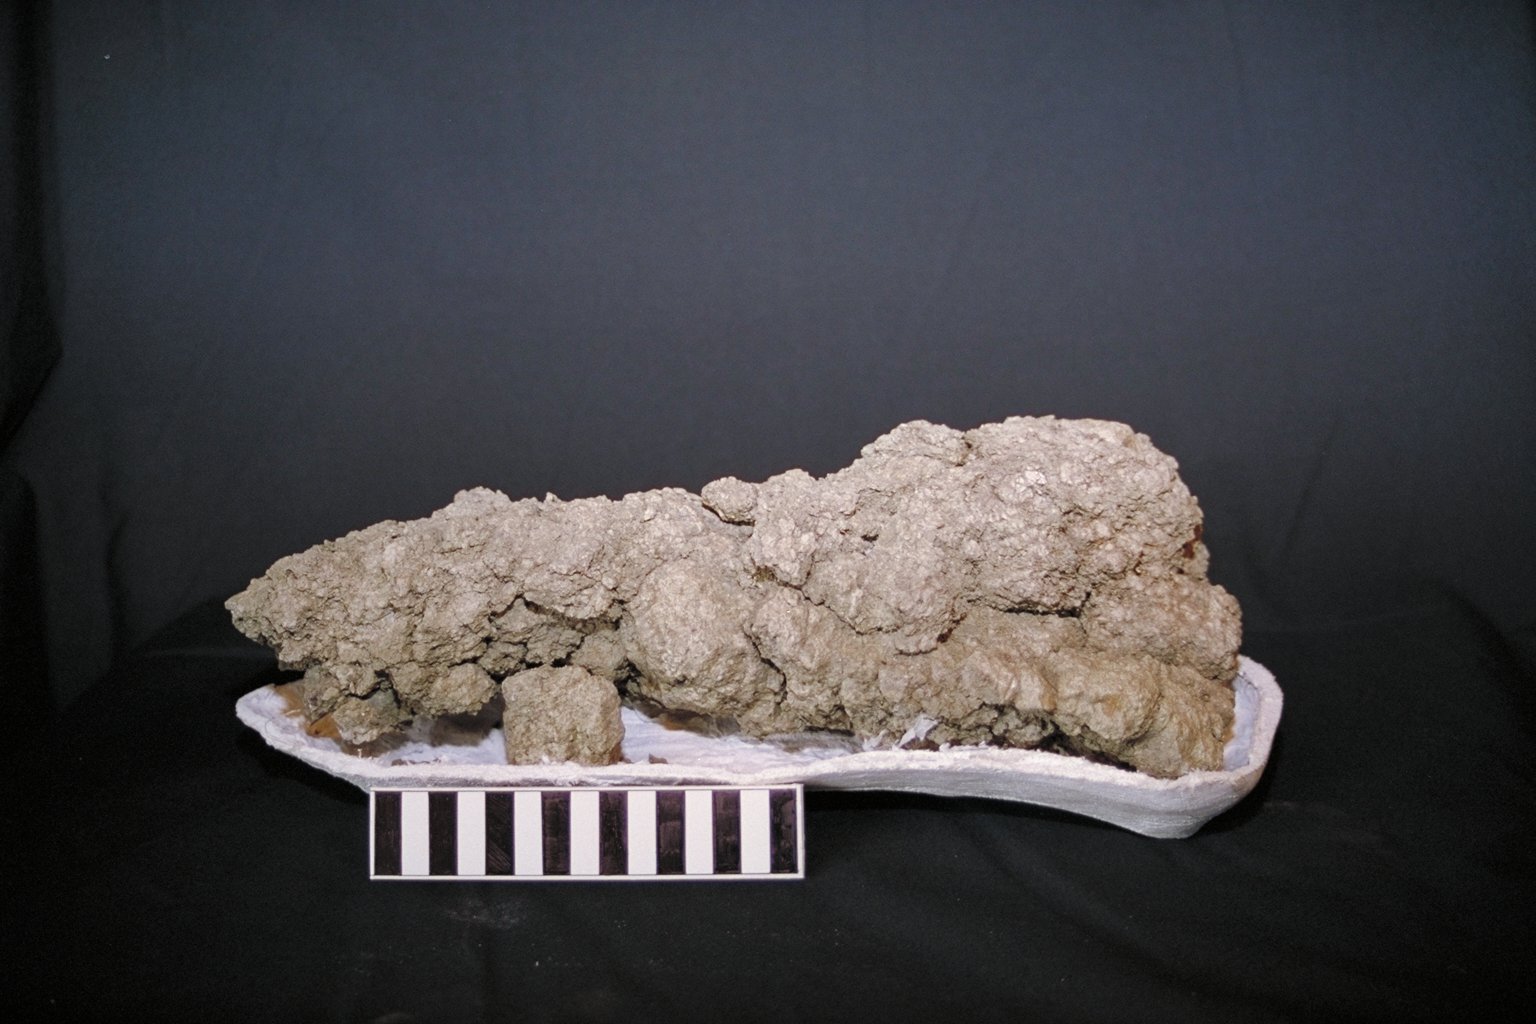 Tan-brown elongated lumpy rock with a 15 cm scale bar sitting in front of it.